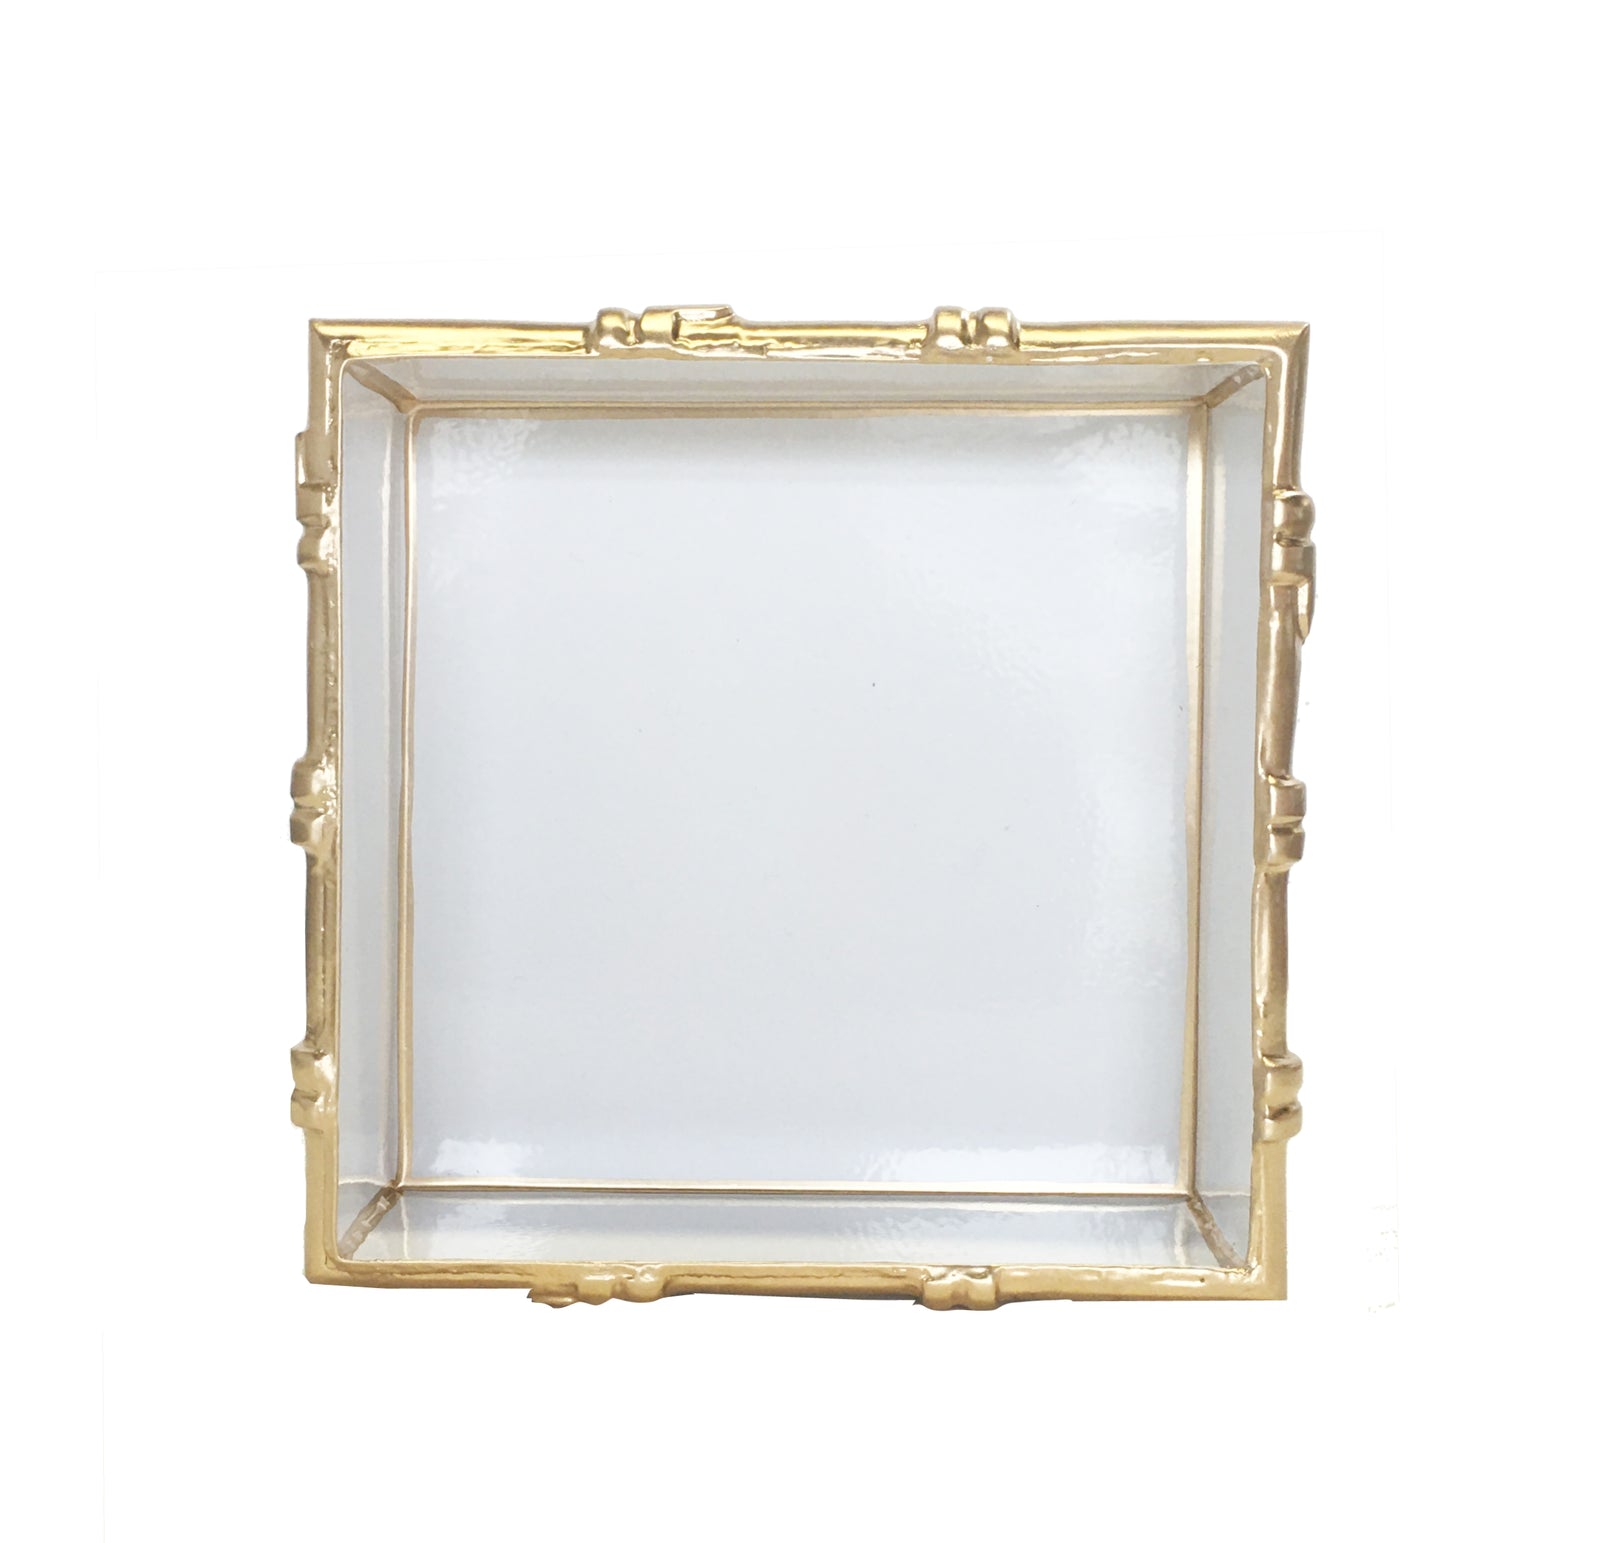 Dana Gibson Bamboo in White Letter Tray